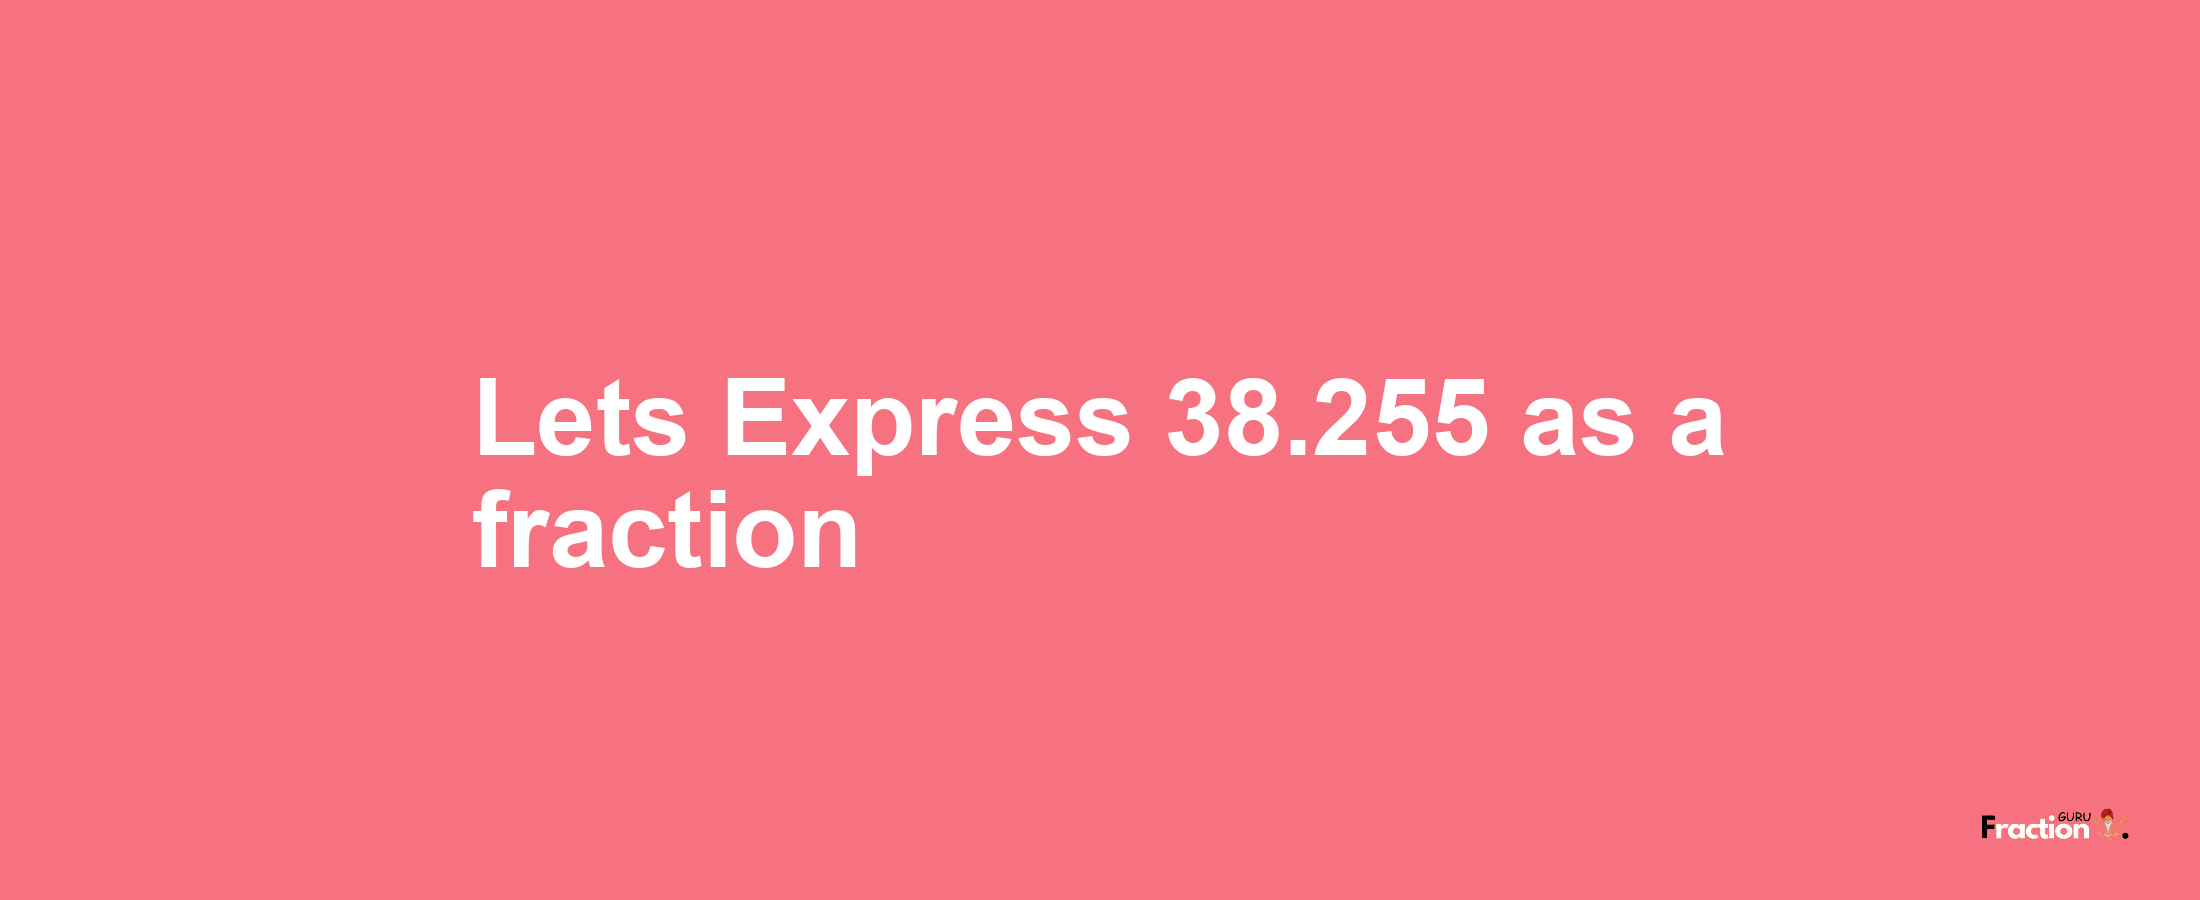 Lets Express 38.255 as afraction